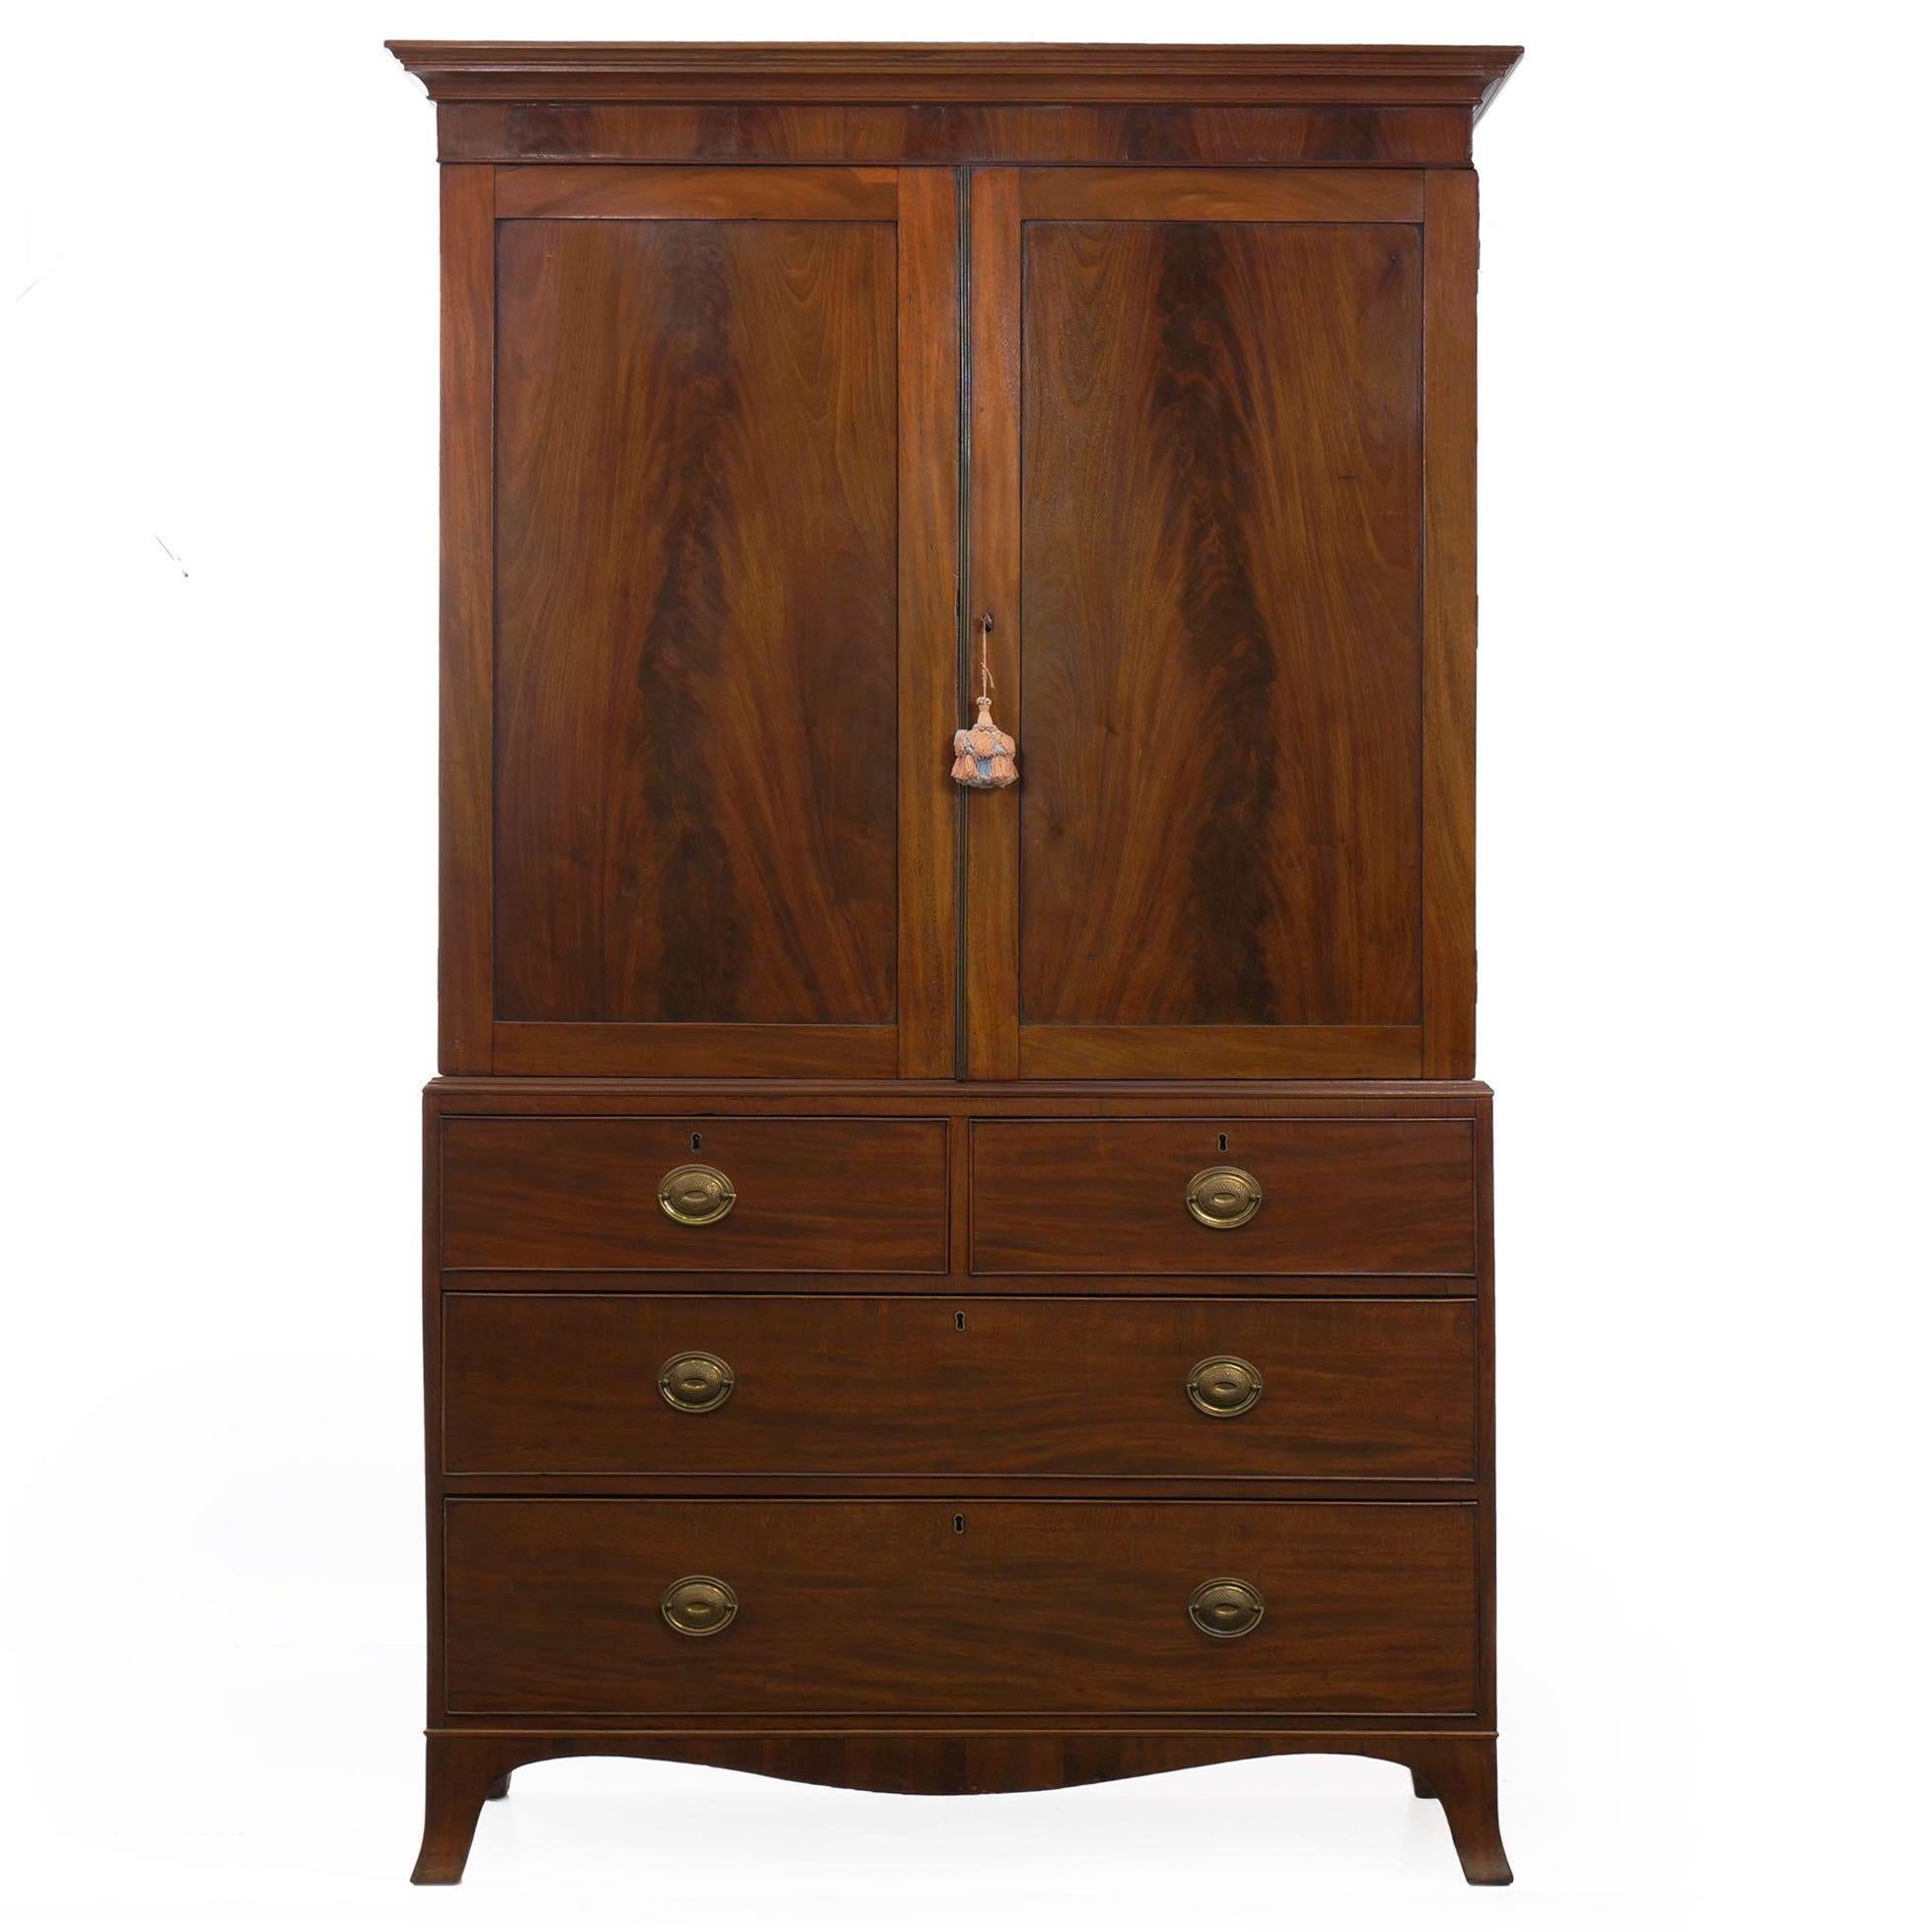 A gorgeous linen press from the turn of the 19th century, being a product of England circa 1790-1810, it is perhaps most notable for the incredible crotch-mahogany panels in the pair of linen doors beneath the cove molded crest. The doors open to